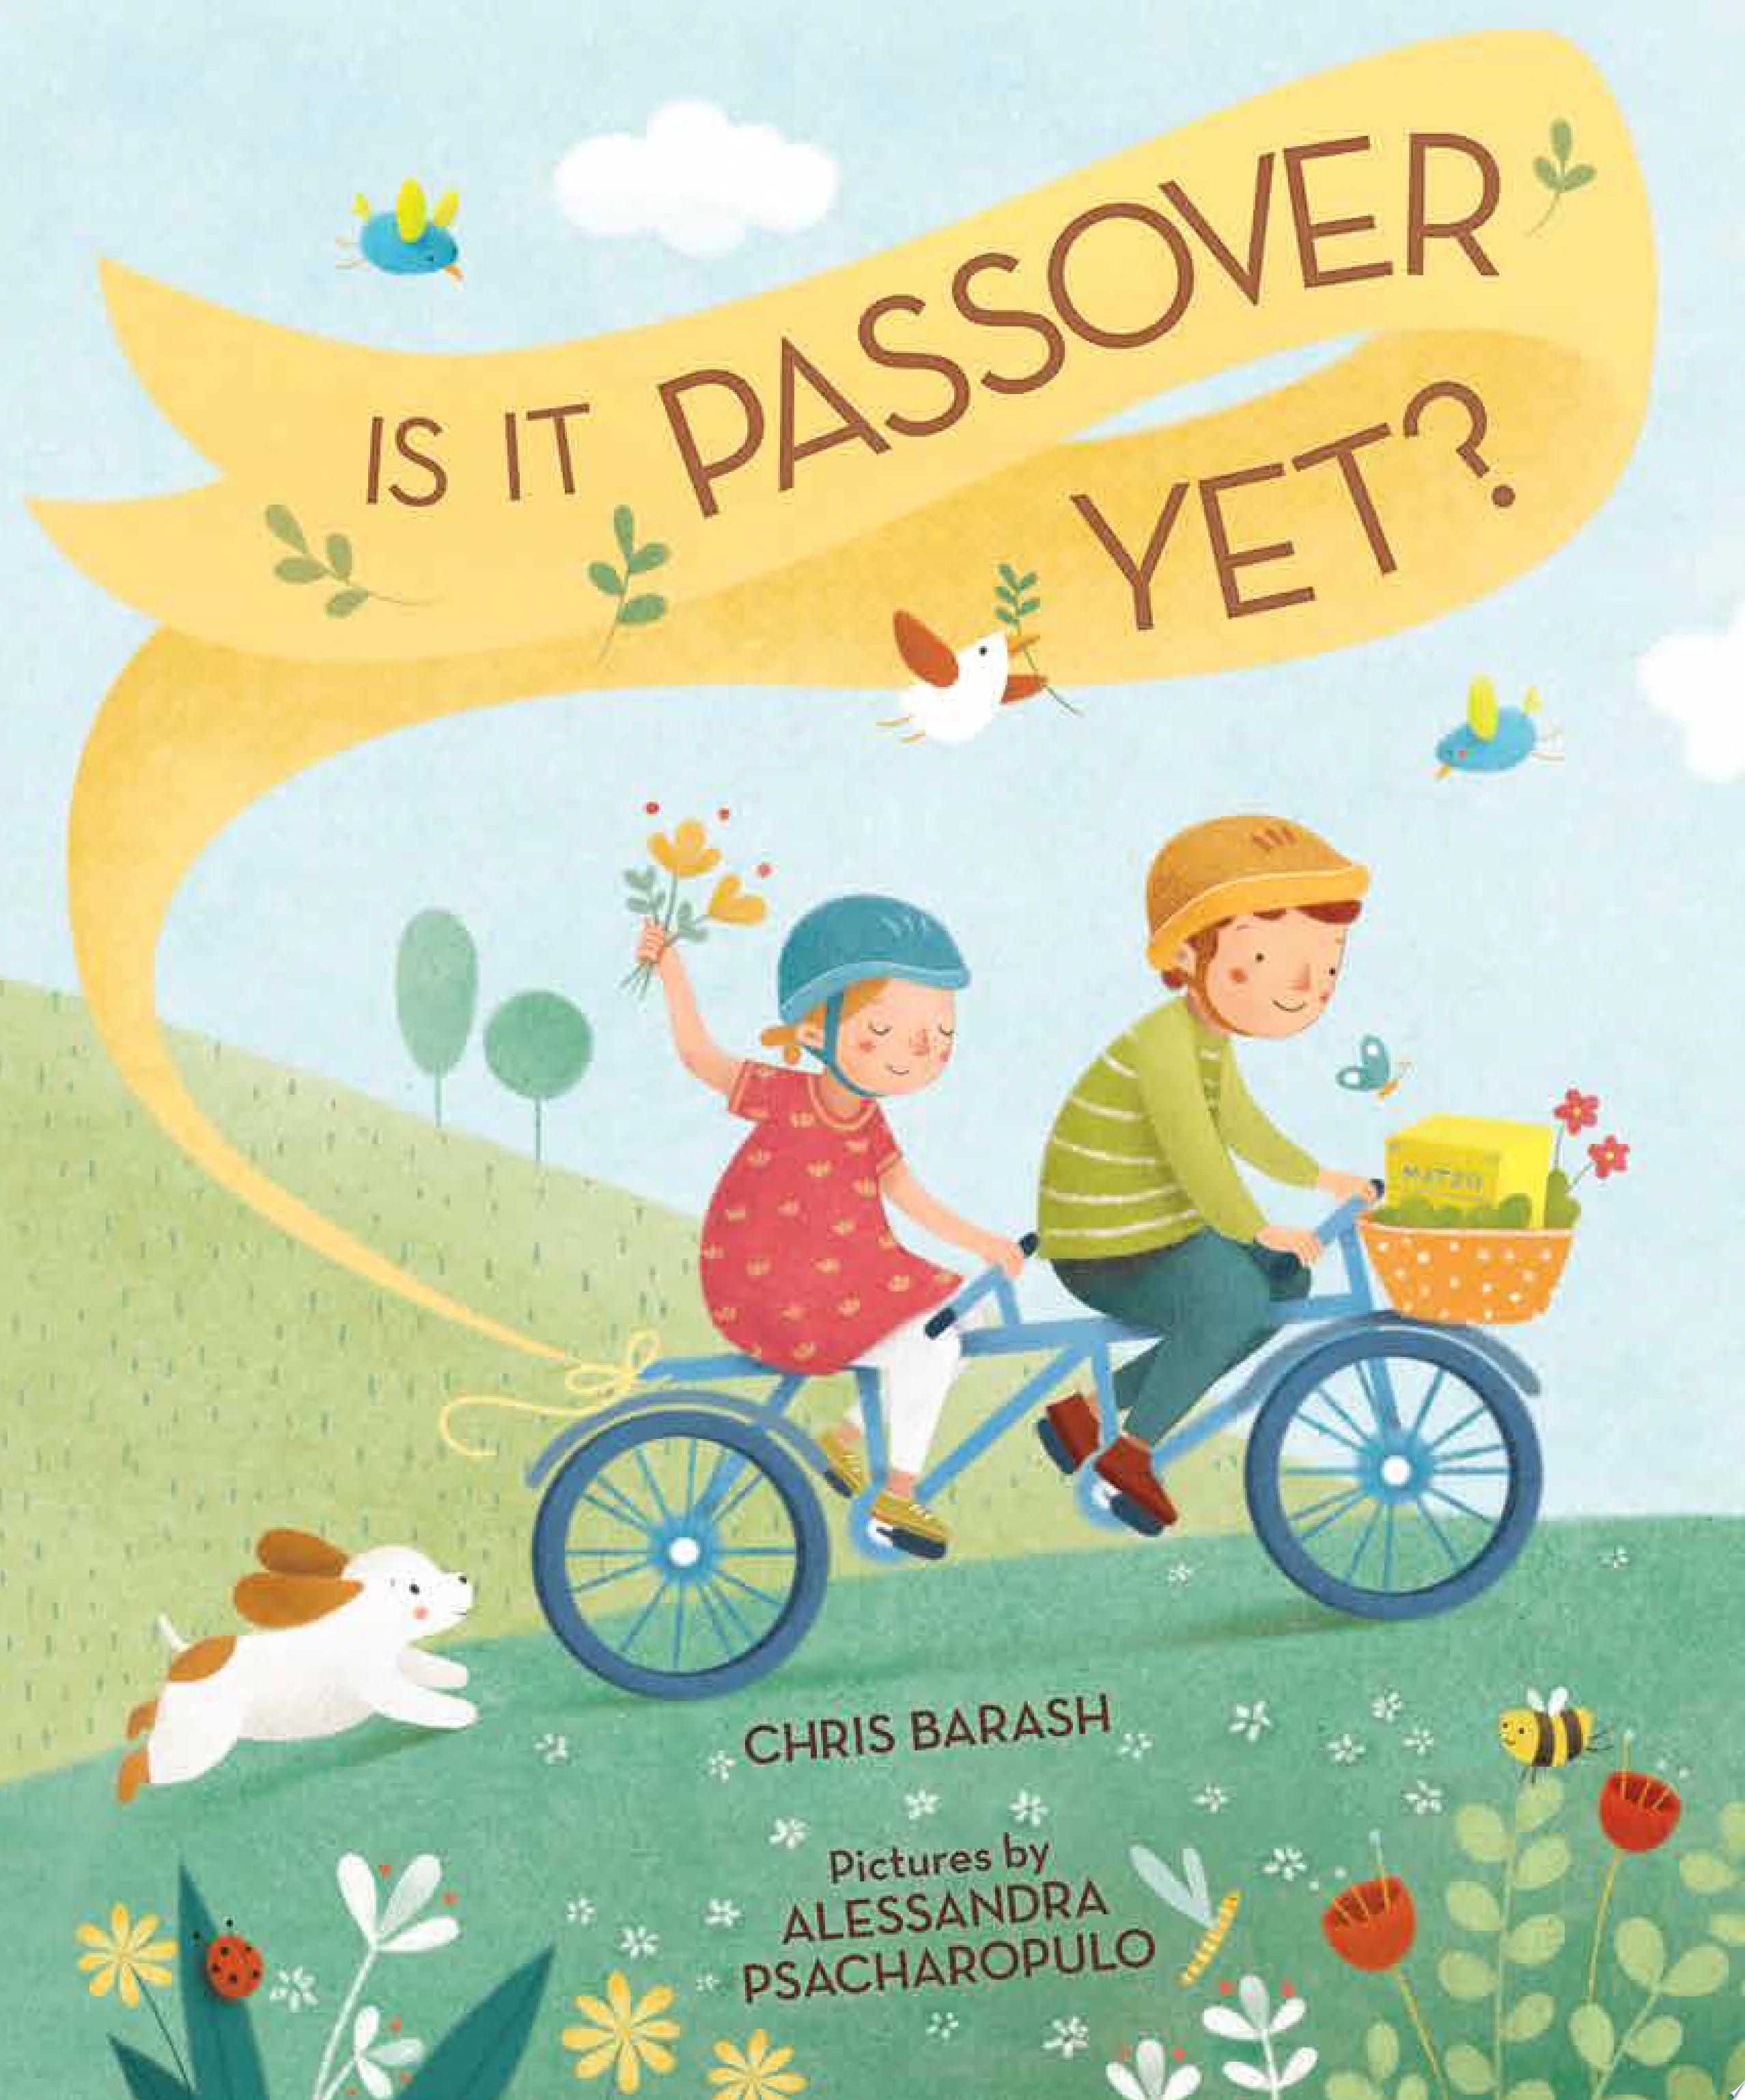 Image for "Is It Passover Yet?"